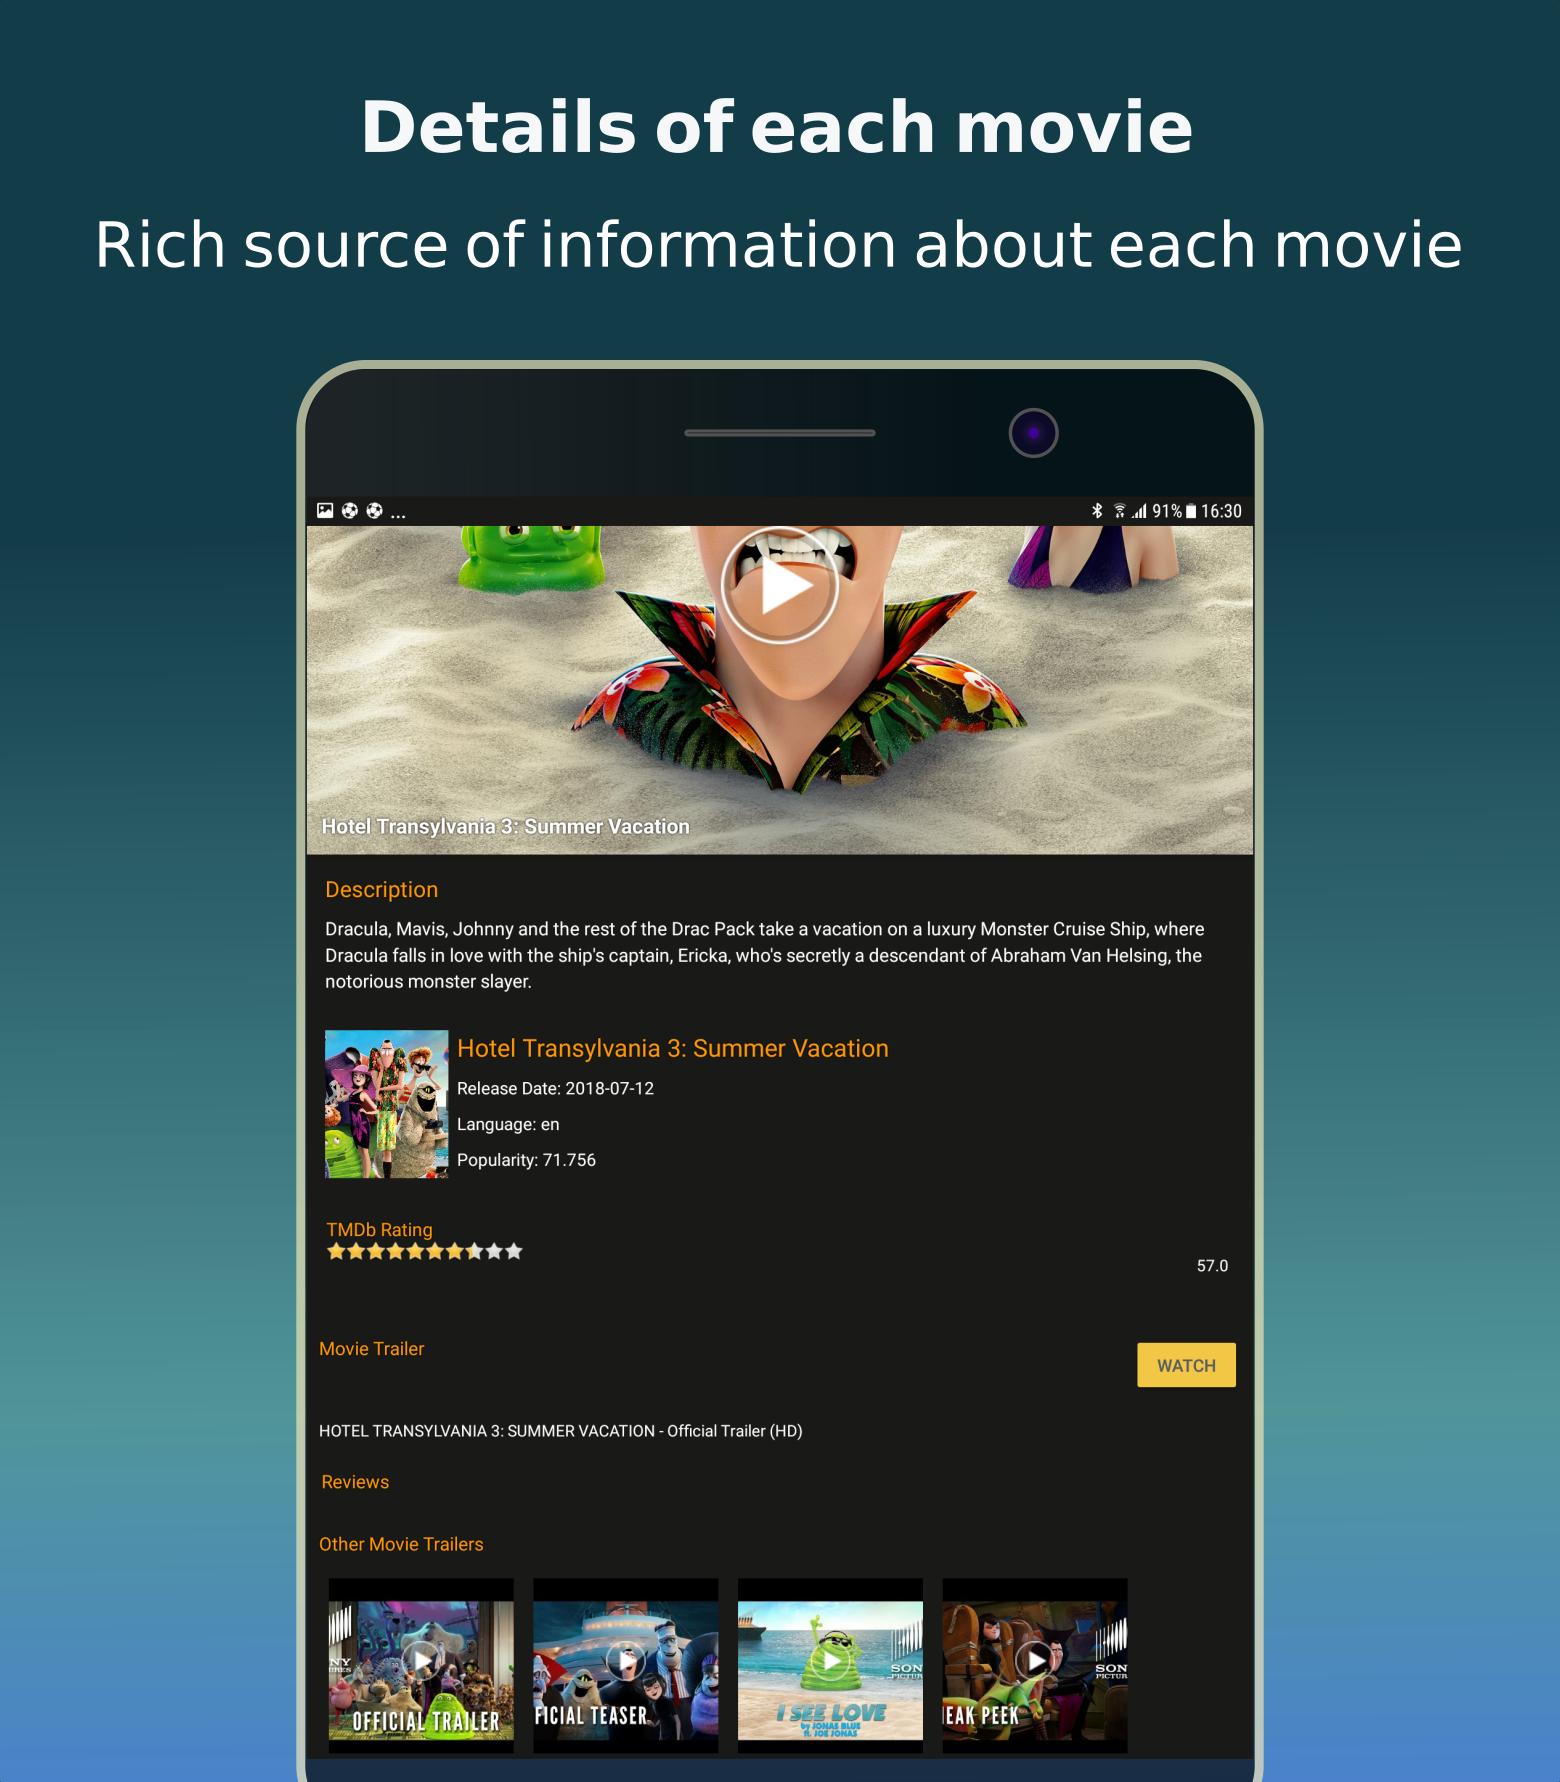 Movie Wiki For Android Apk Download - roblox site 006 wiki